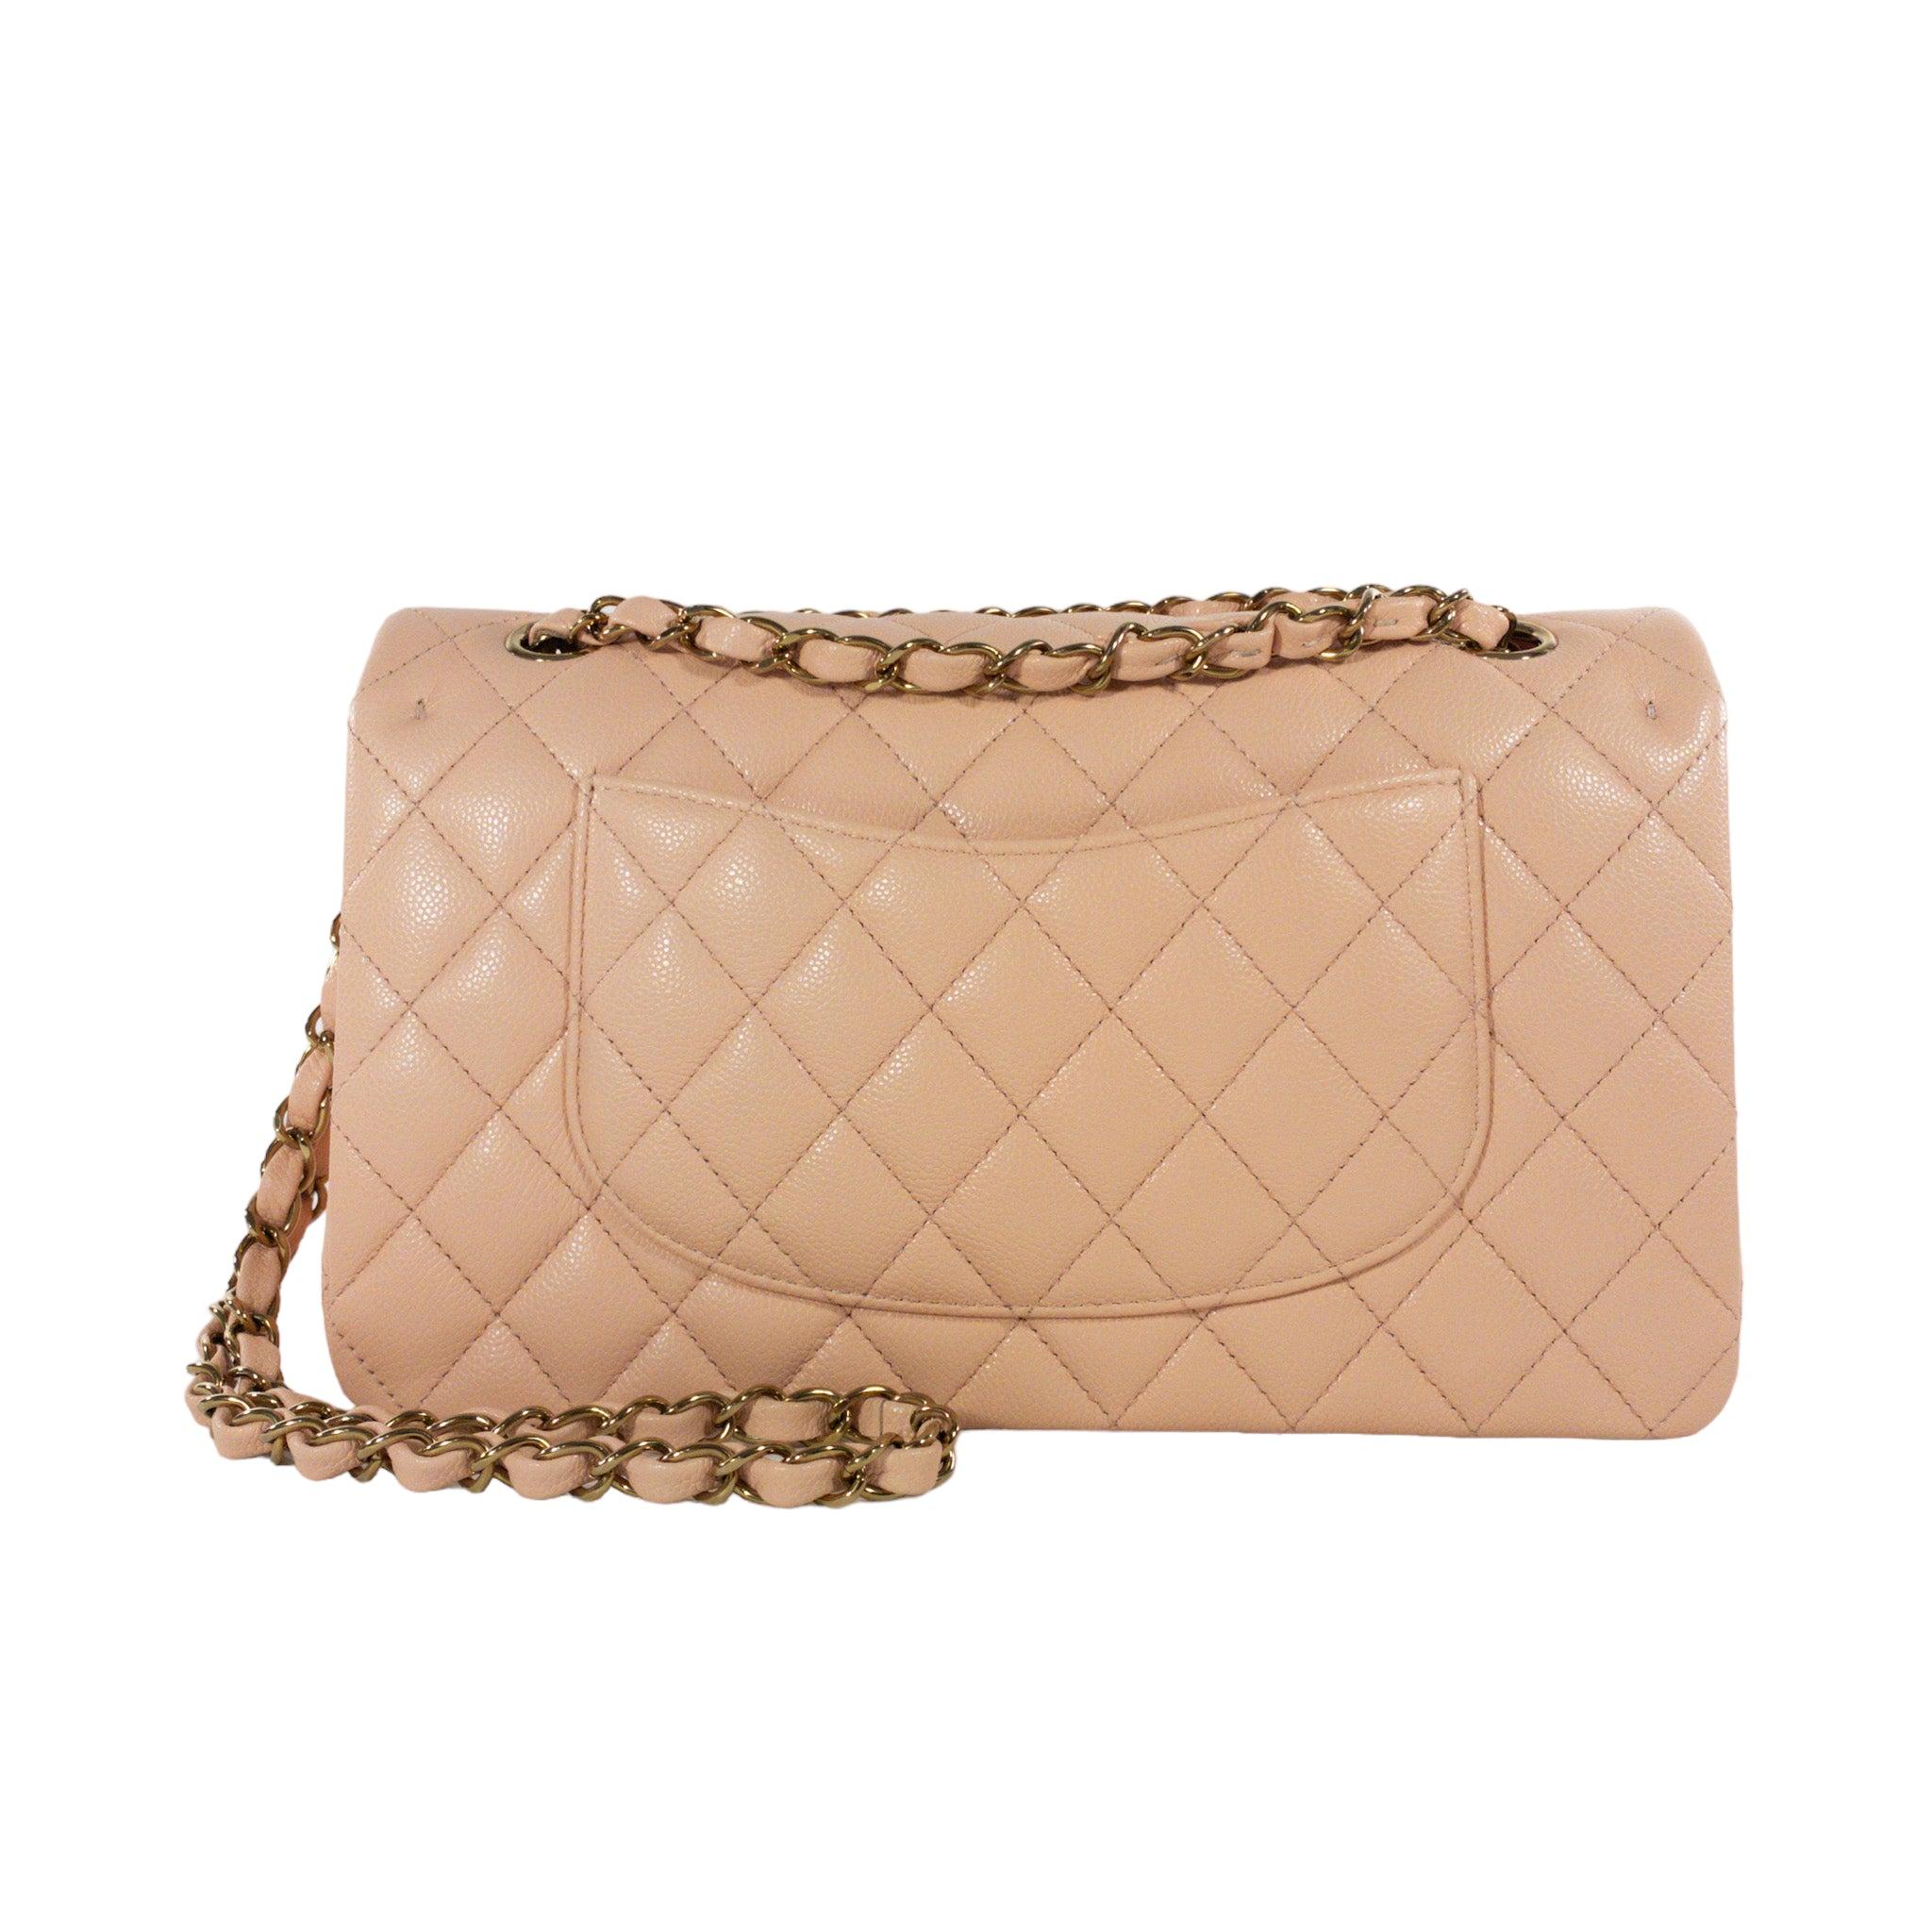 Chanel Peach Caviar Medium Flap GHW Bag

This is an authentic Chanel Medium Classic Flap. The bag has a flap closure with a Double C logo turn lock. The interior is leather and includes one slip pocket and one zip pocket, it also has one Exterior